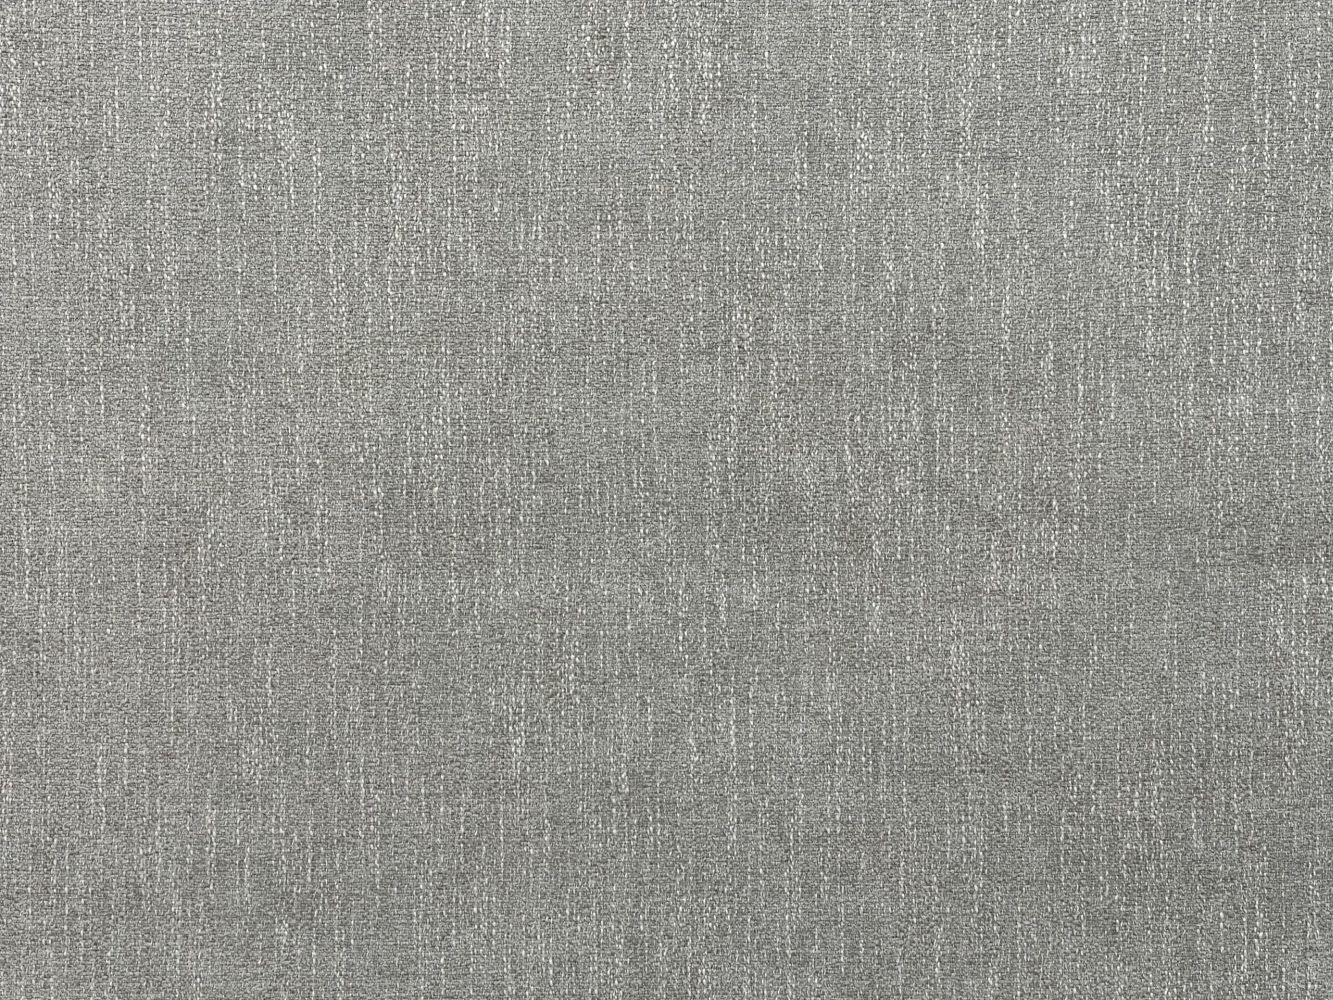 Brodex Laurel Gray Solid High Performance Home Decor Fabric